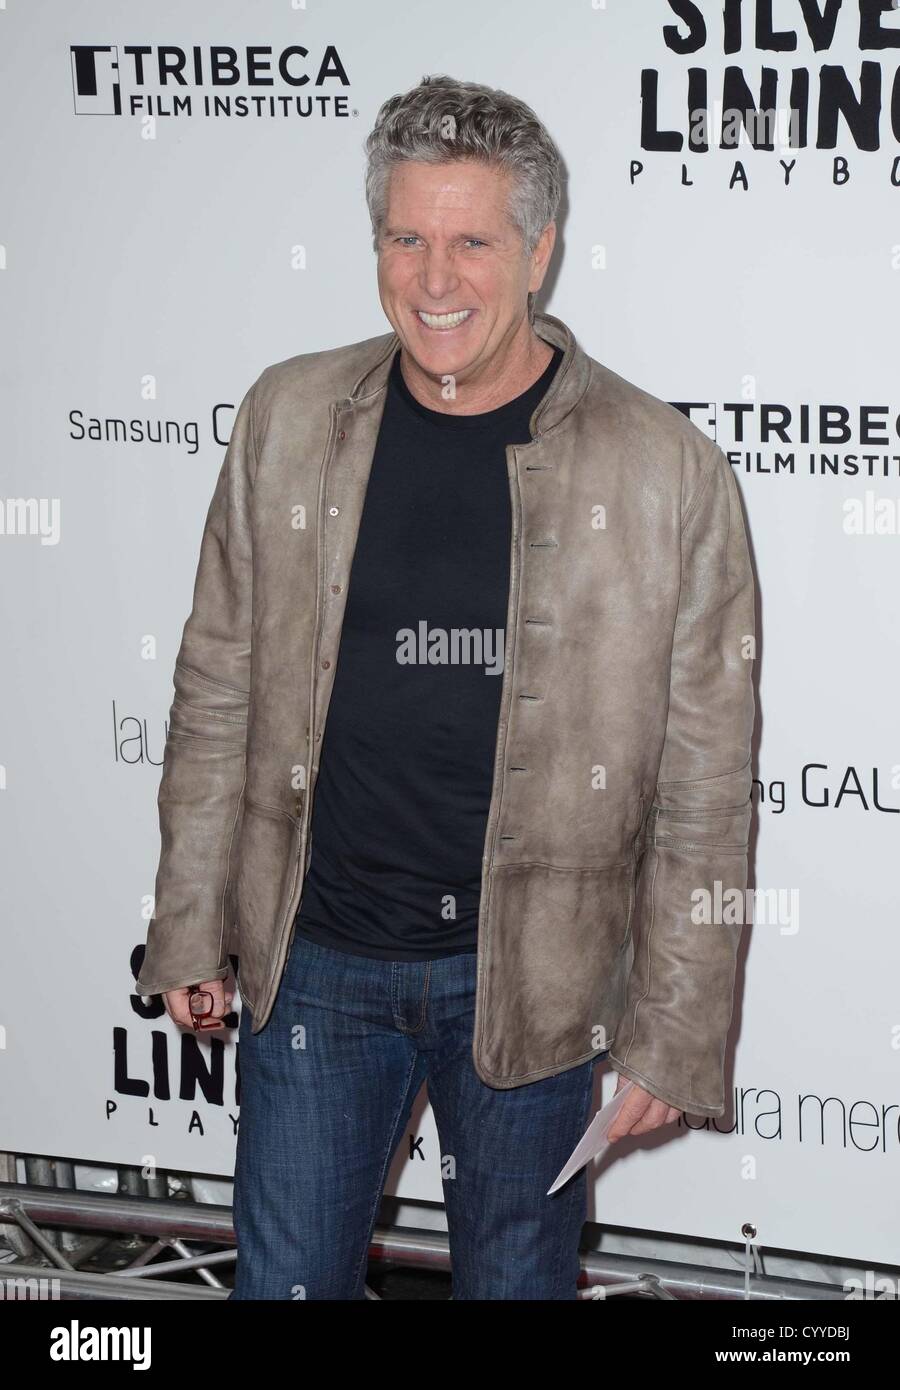 Donny Deutsch at arrivals for SILVER LININGS PLAYBOOK Premiere, The Ziegfeld Theatre, New York, NY November 12, 2012. Photo By: Derek Storm/Everett Collection Stock Photo